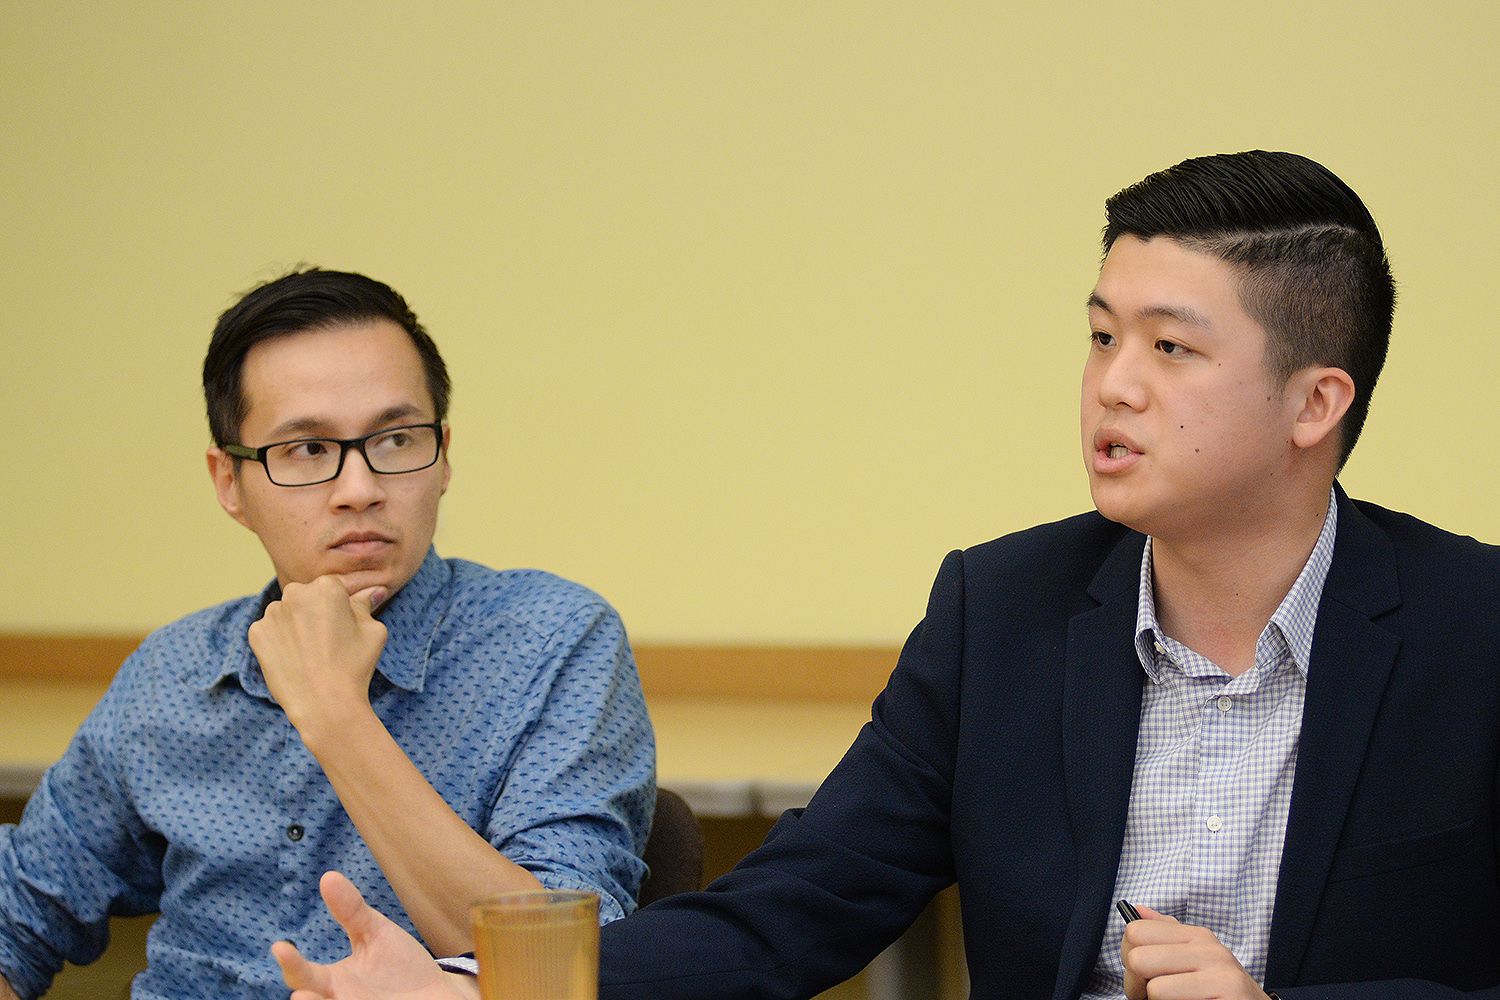 Long Bui, visiting assistant professor of American studies, and Alton Wang '15 moderated the discussion. While at Wesleyan, Wang studied sociology and government, chaired the Asian American Student Collective and taught a course on Asian American history. He currently works in Washington D.C. engaging voters at Asian and Pacific Islander American Vote and serves on the Board of Directors for the Conference on Asian Pacific American Leadership.